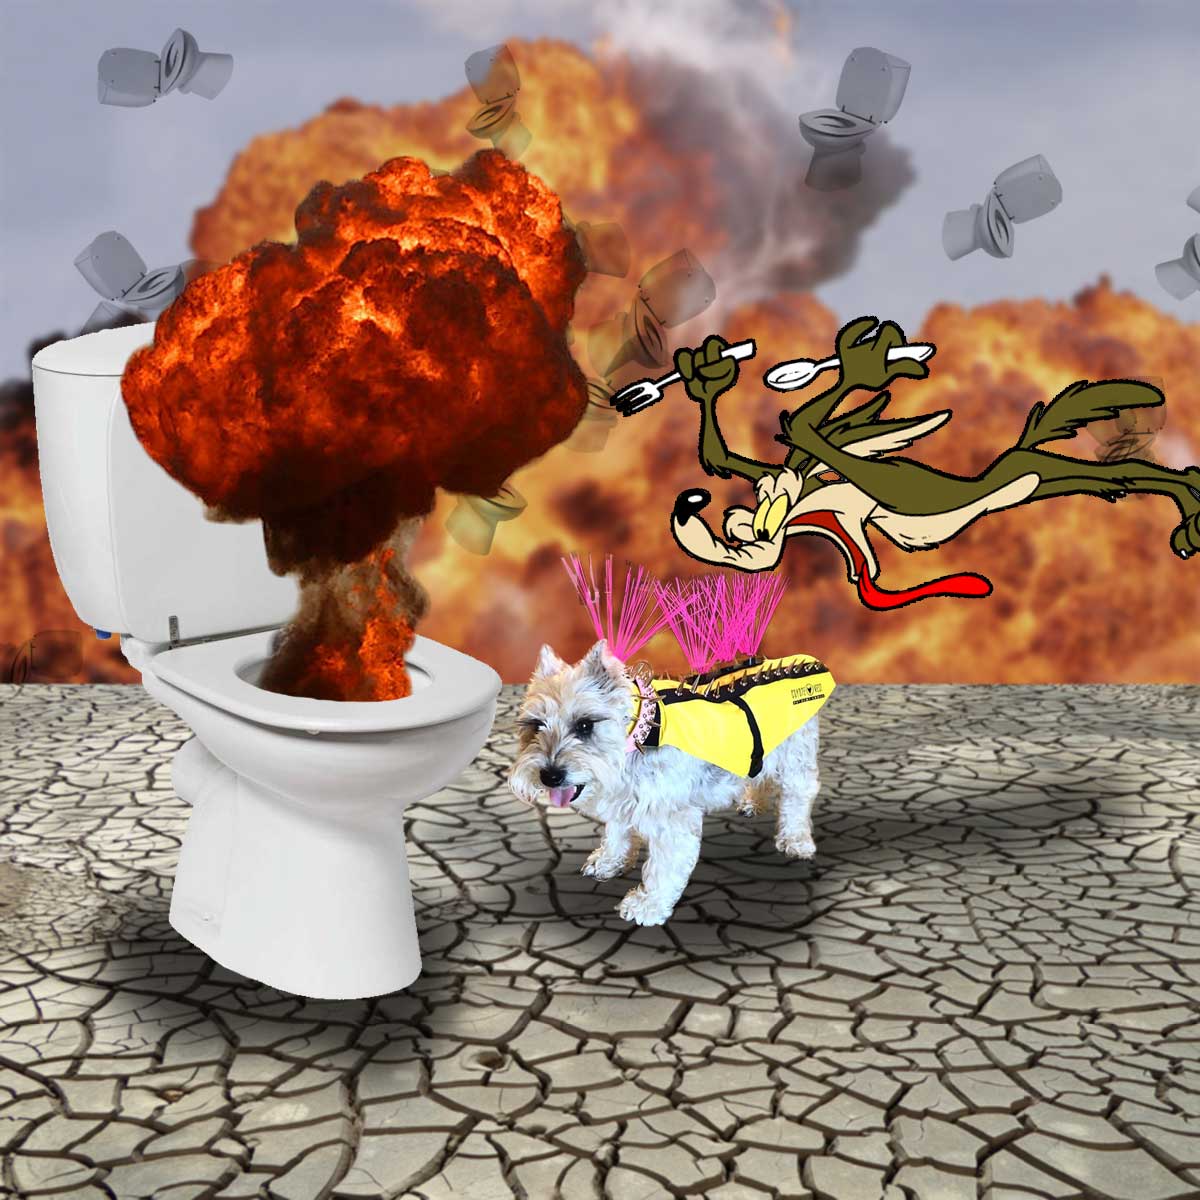 The Exploding Toilet download